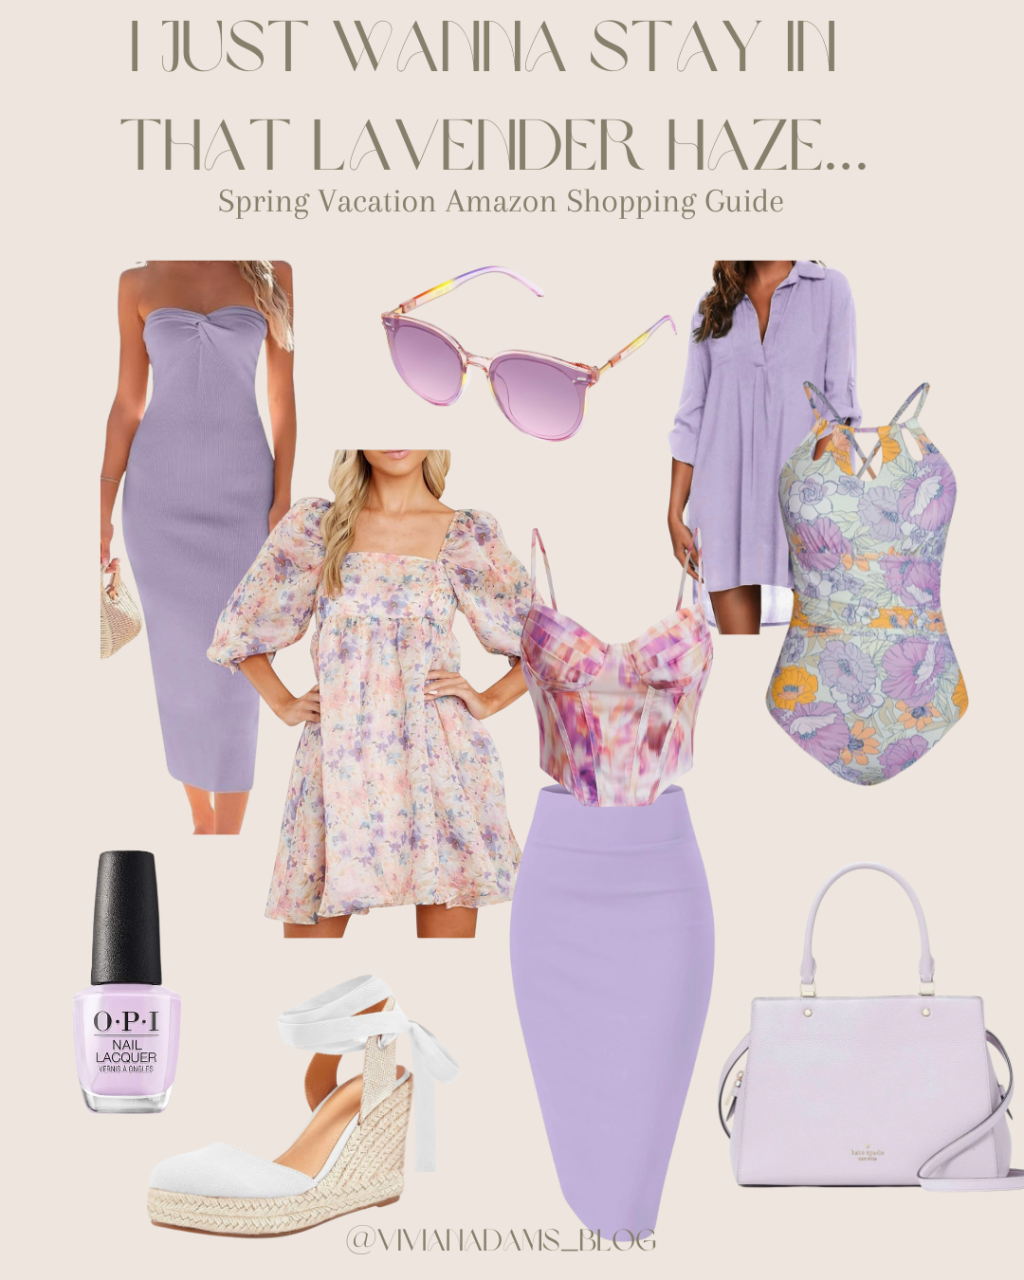 Lavender Haze Inspired Vacation Shopping Guide